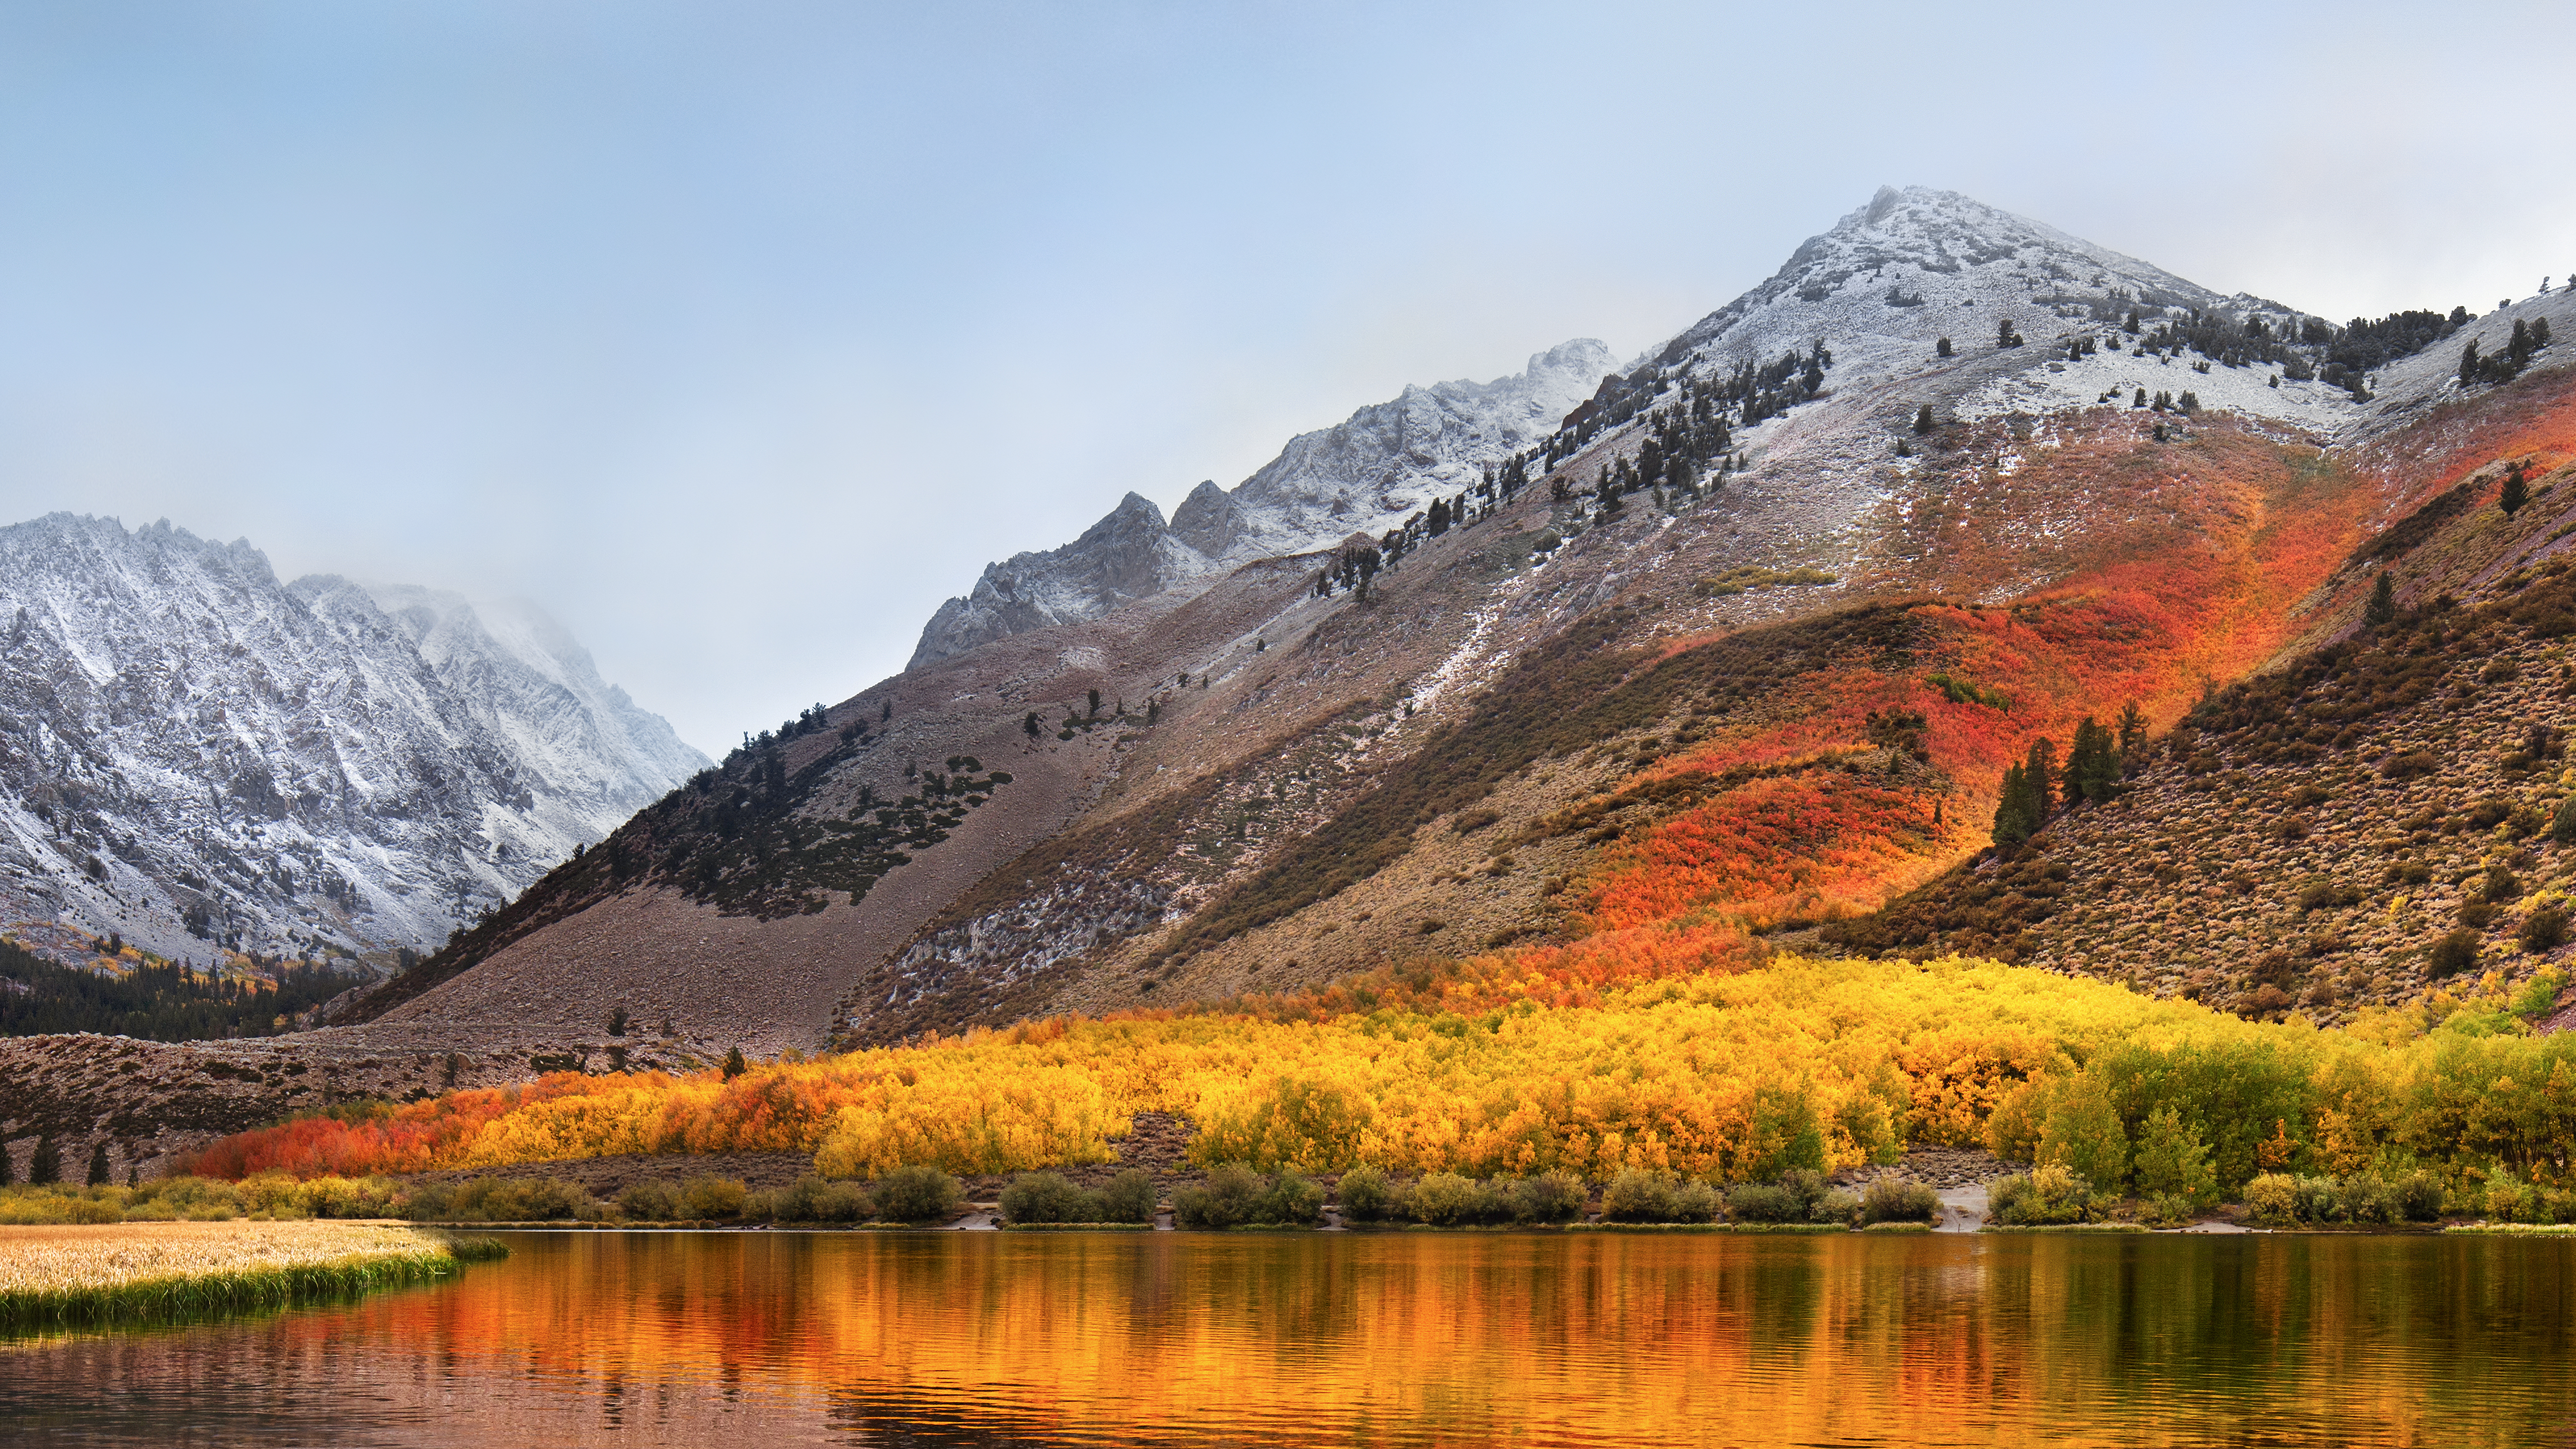 IOS 11 MacOS High Sierra IMac Pro Wallpapers From WWDC 2017